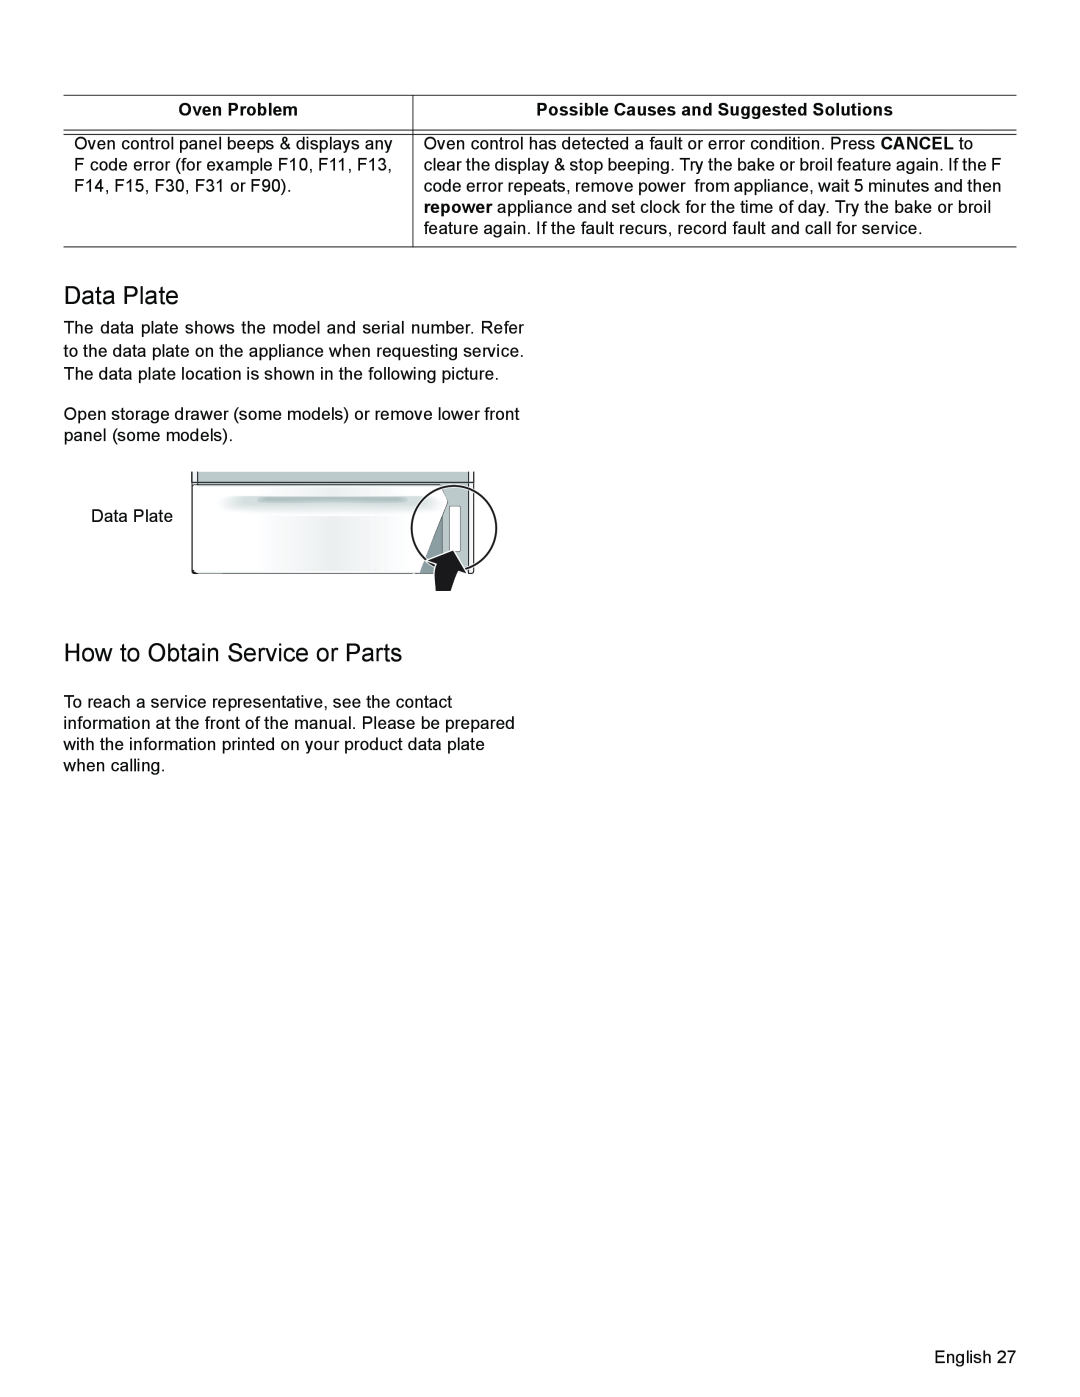 Bosch Appliances HGS3023UC manual Data Plate, How to Obtain Service or Parts, Oven Problem 